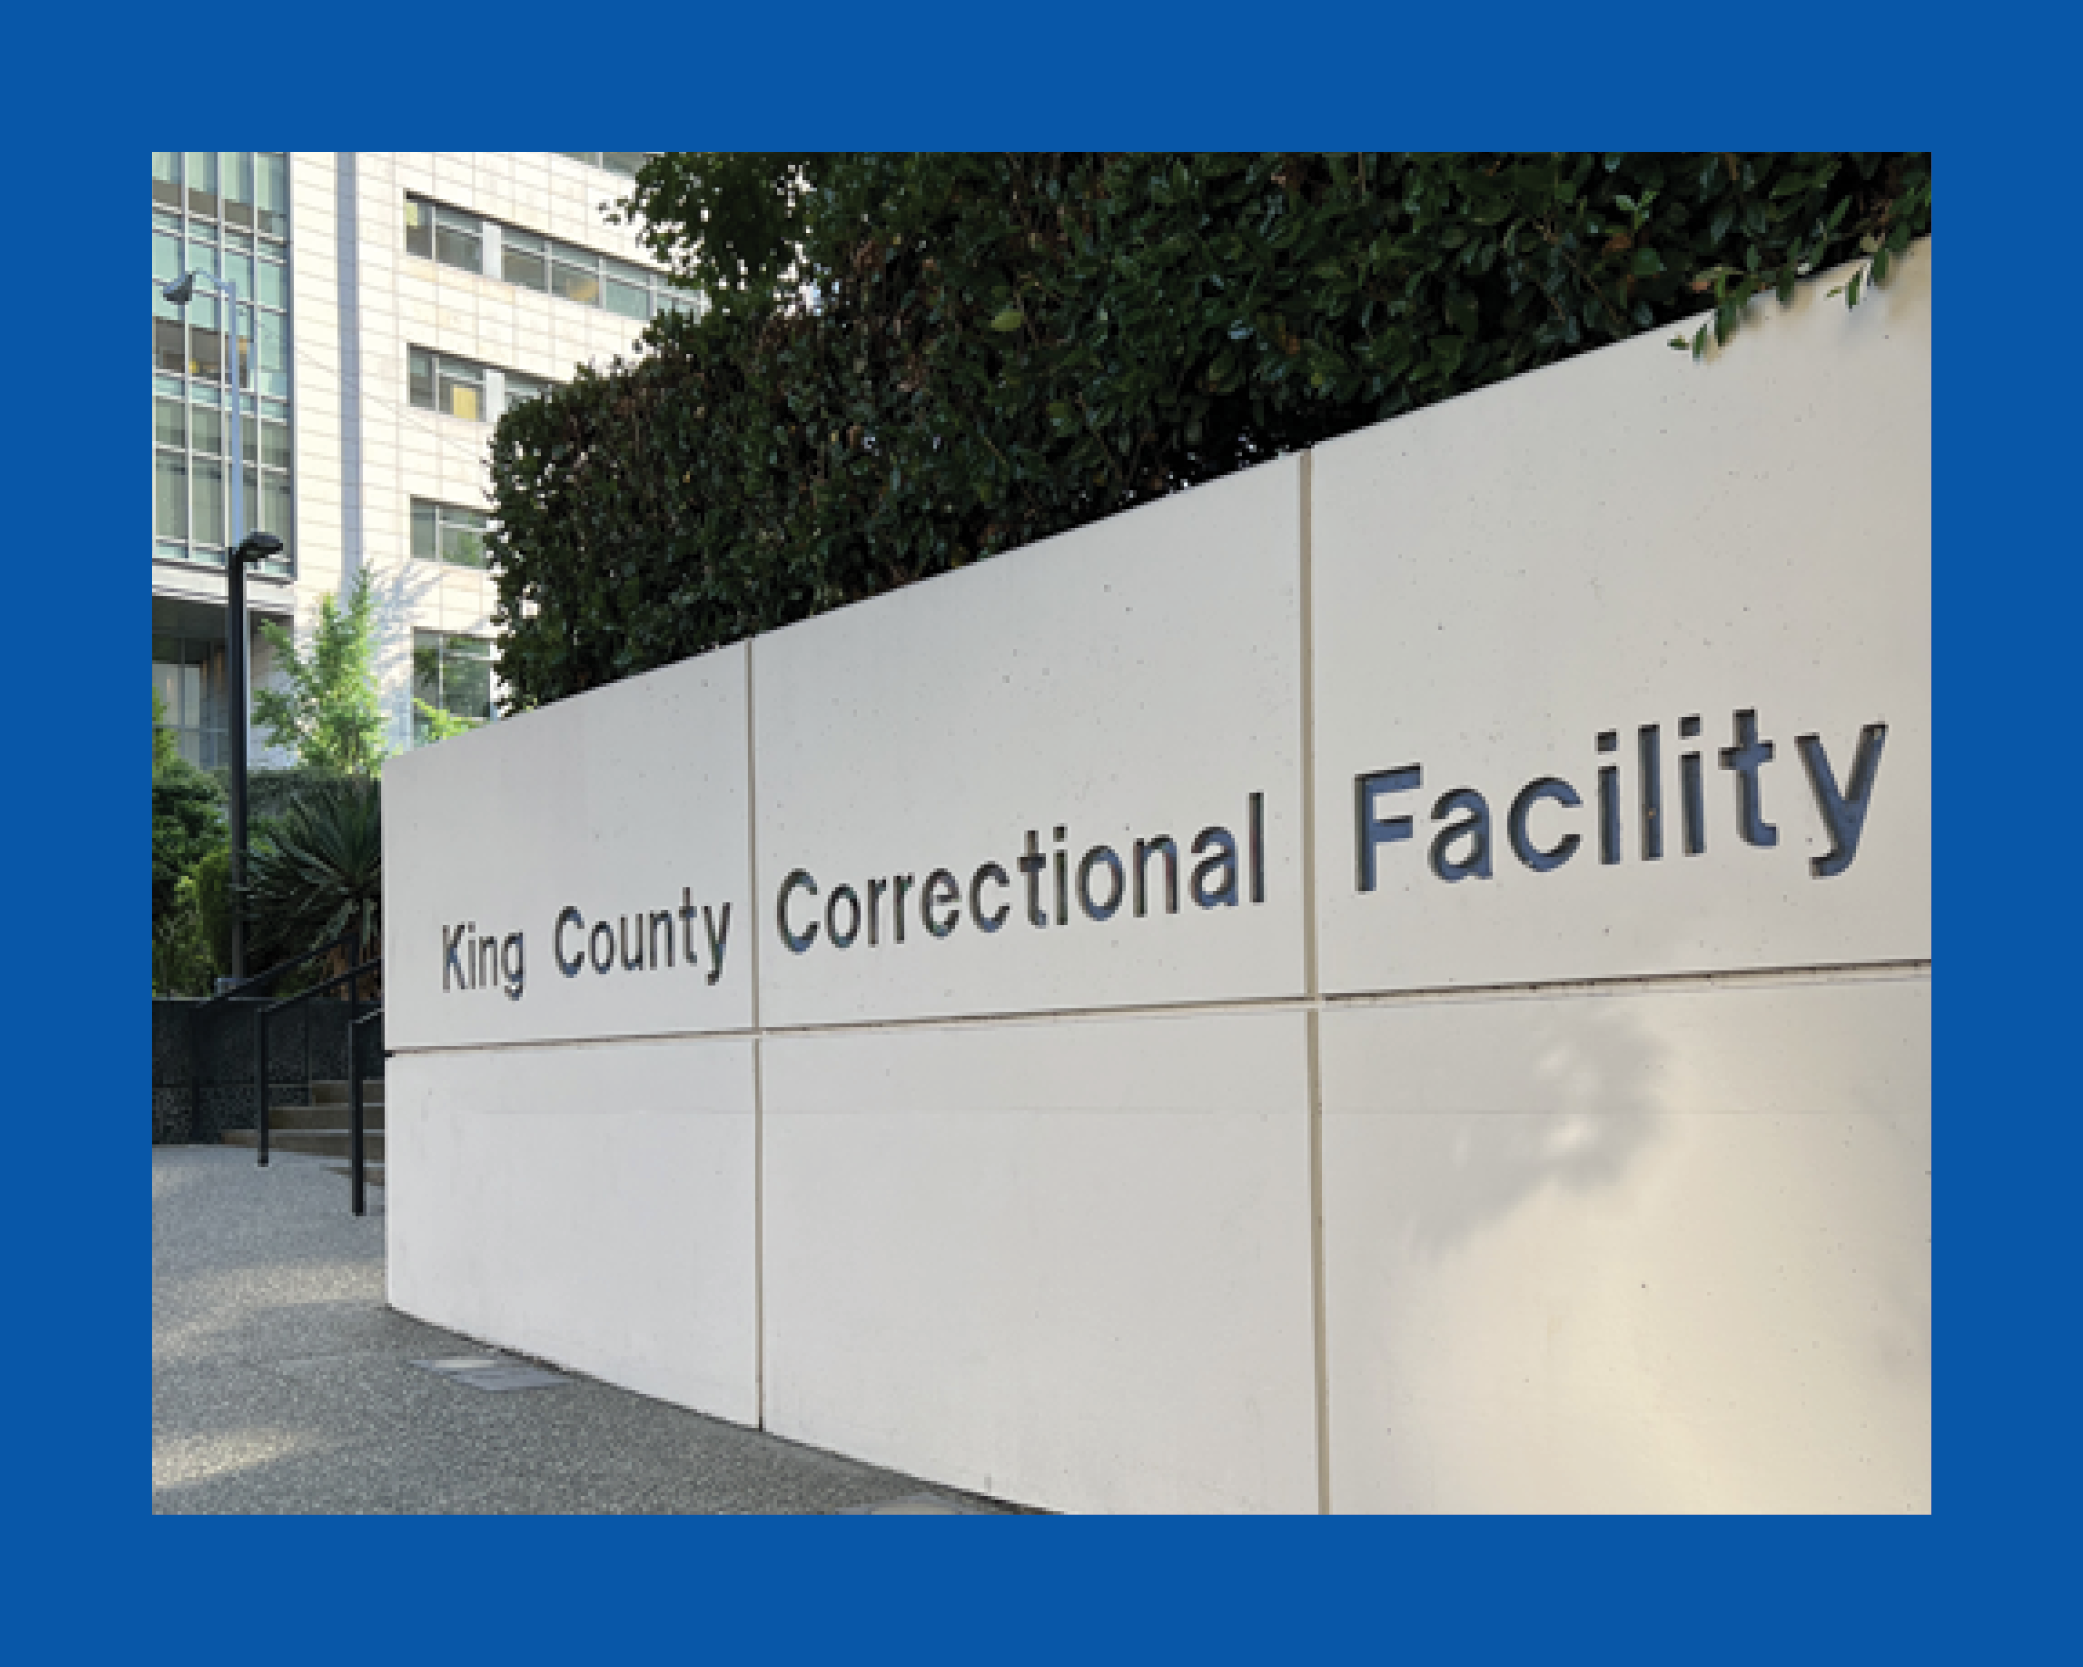 A photo of the sign outside of the King County Correctional Facility